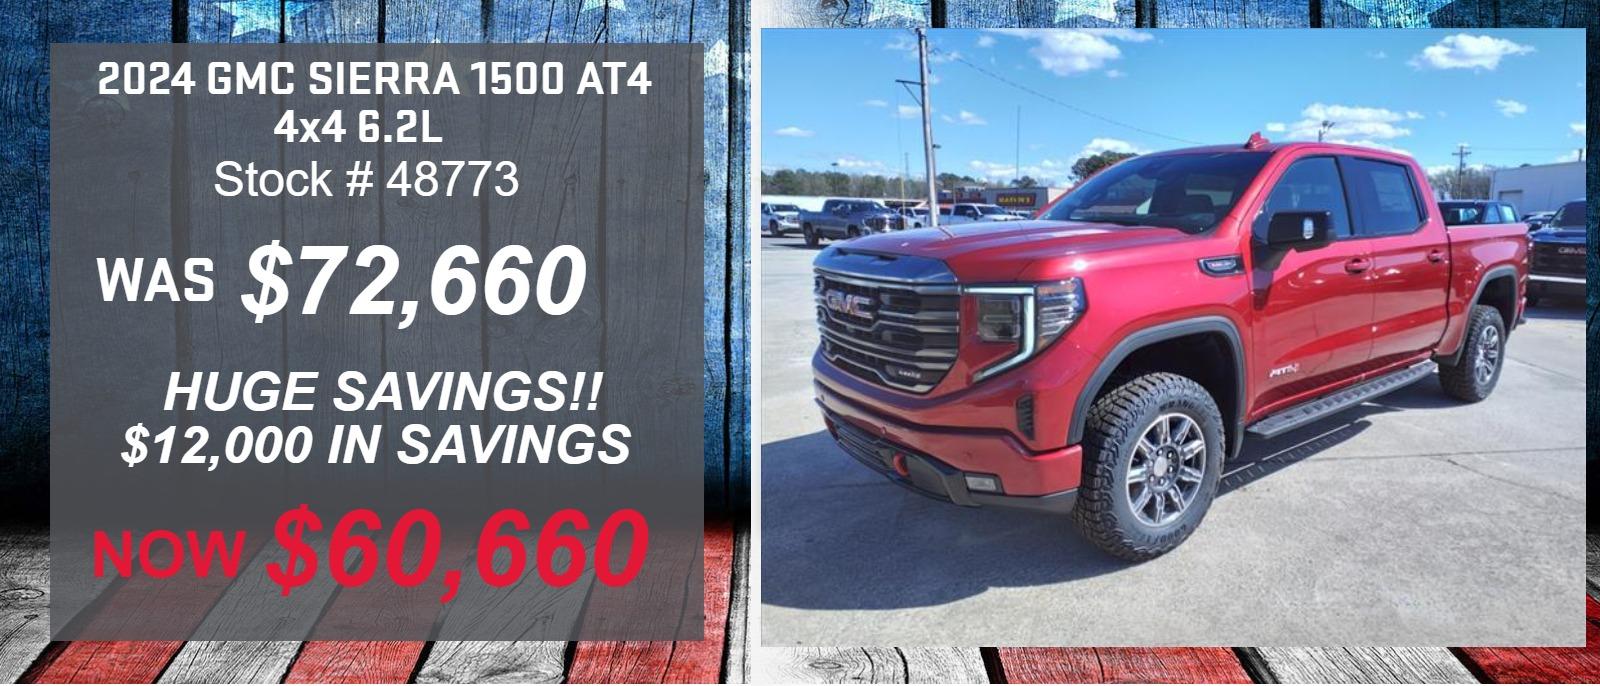 Lowest Price on New GMC Sierra 1500 AT4 6.2L